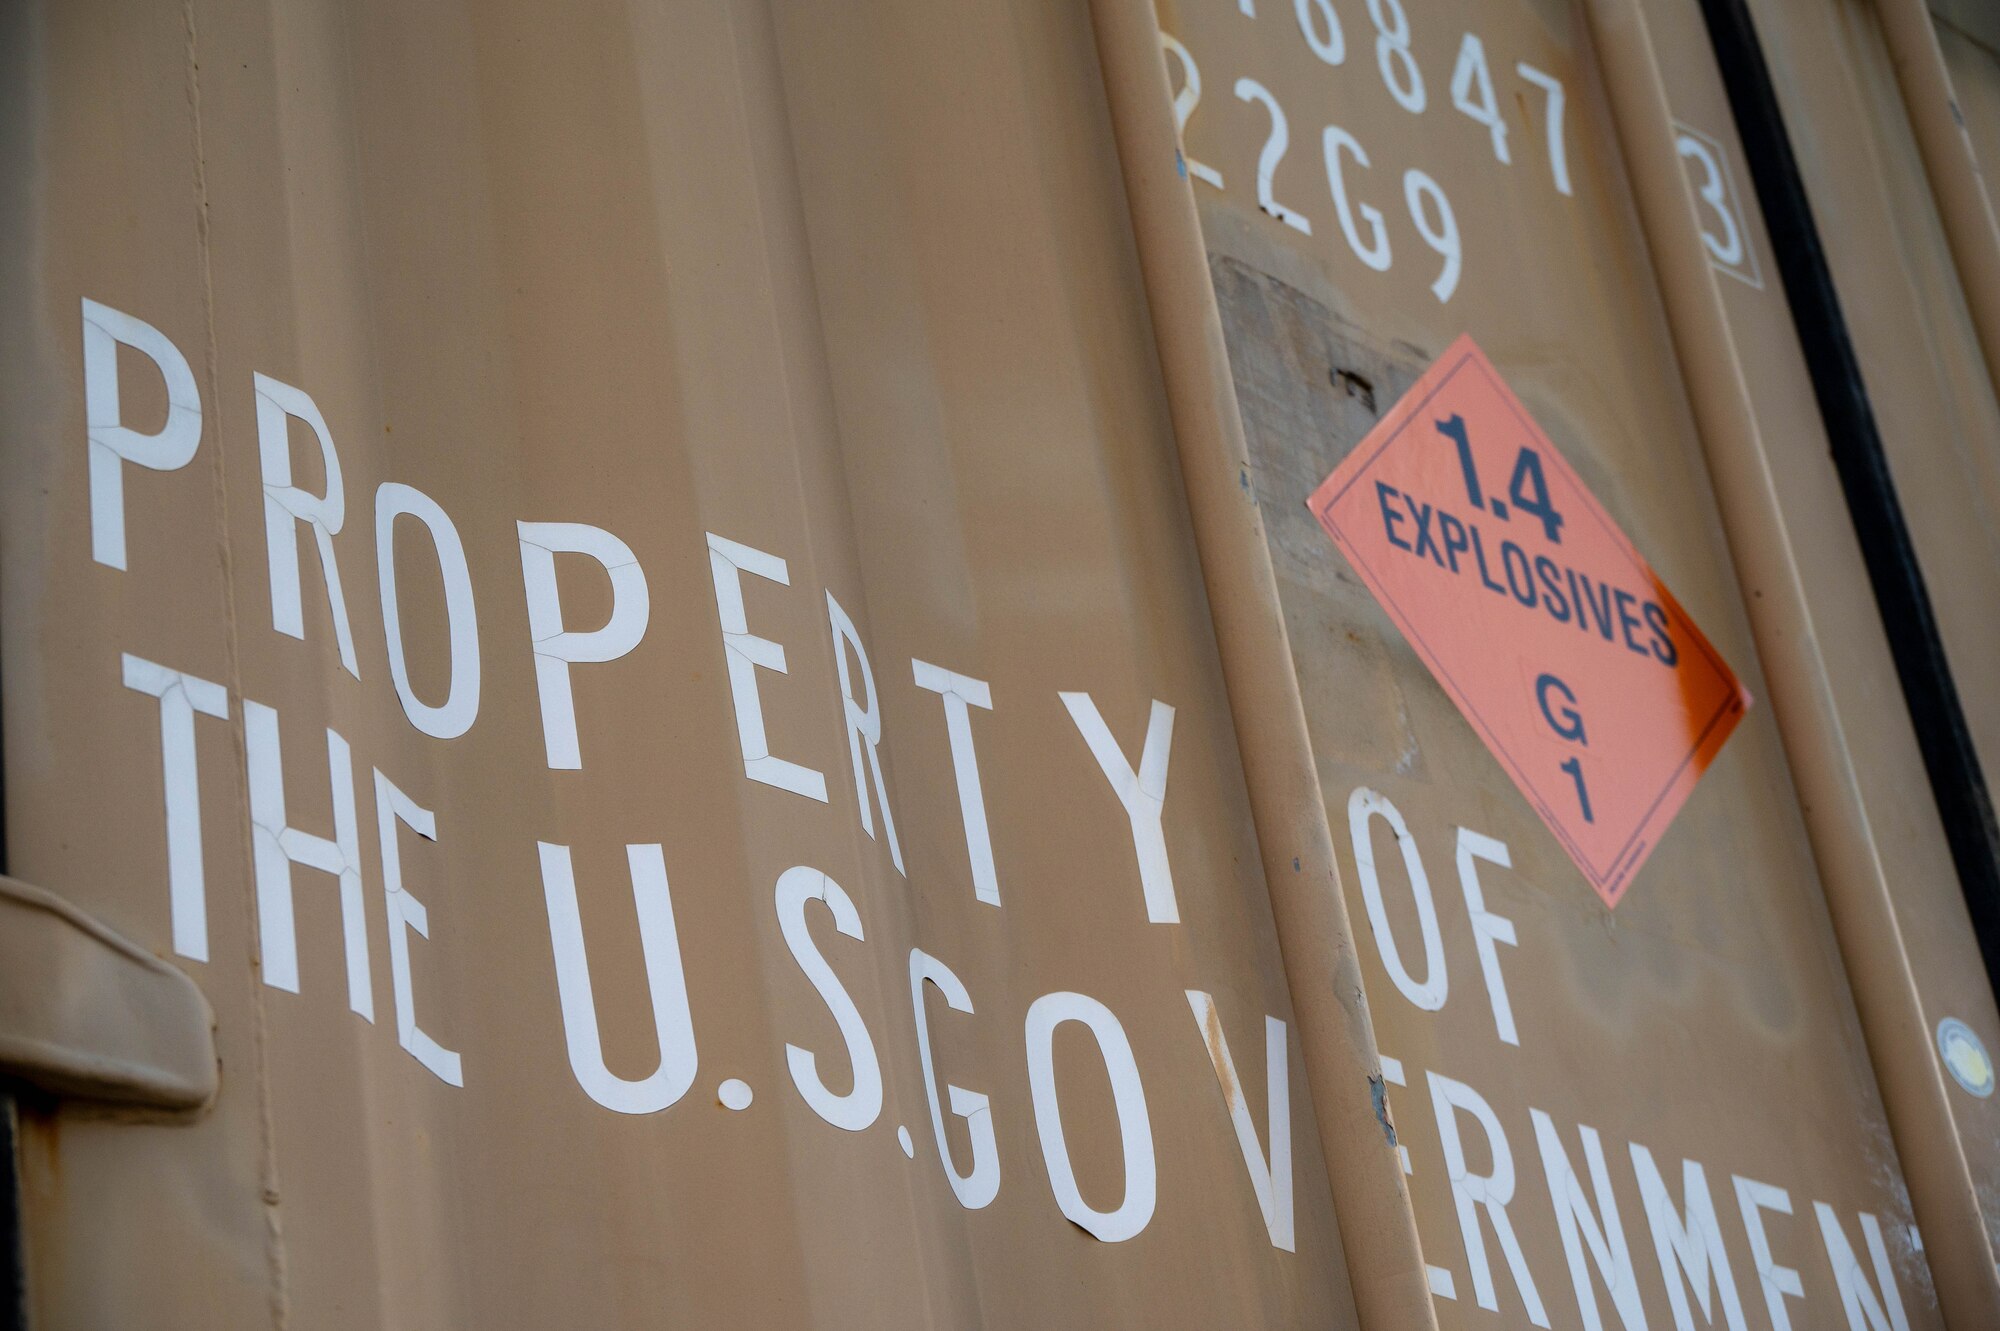 A shipping container reads “PROPERTY OF THE U.S. GOVERNMENT”